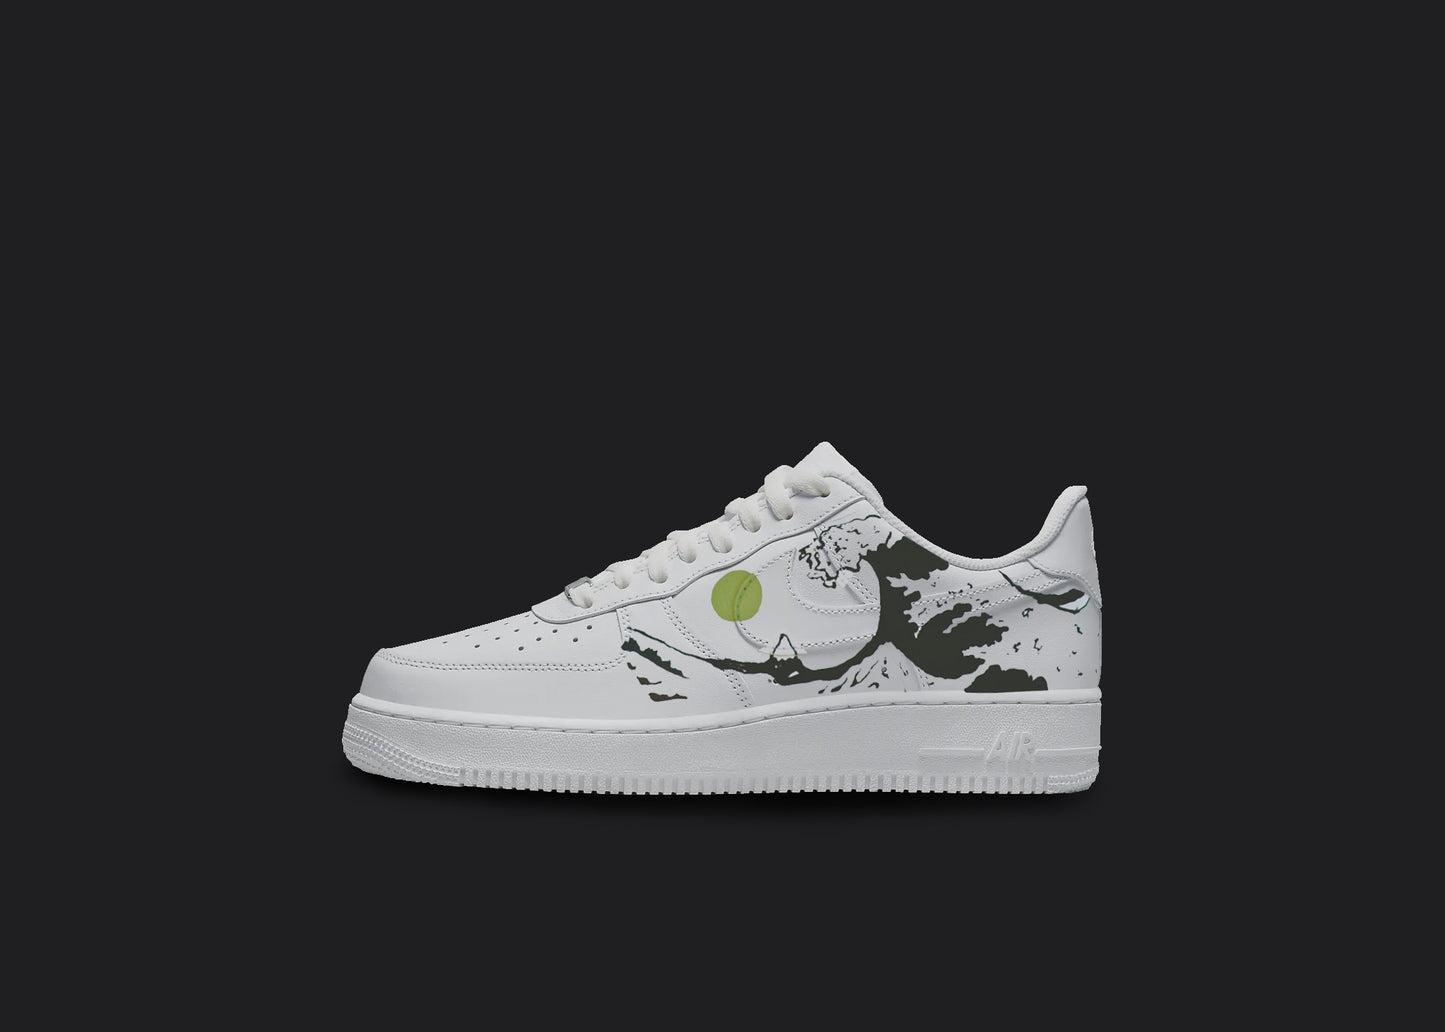 The image is of a Custom Nike Air force 1 sneaker on a blank black background. The white custom nike sneaker has a black kawasaki wave illustration on the side.  